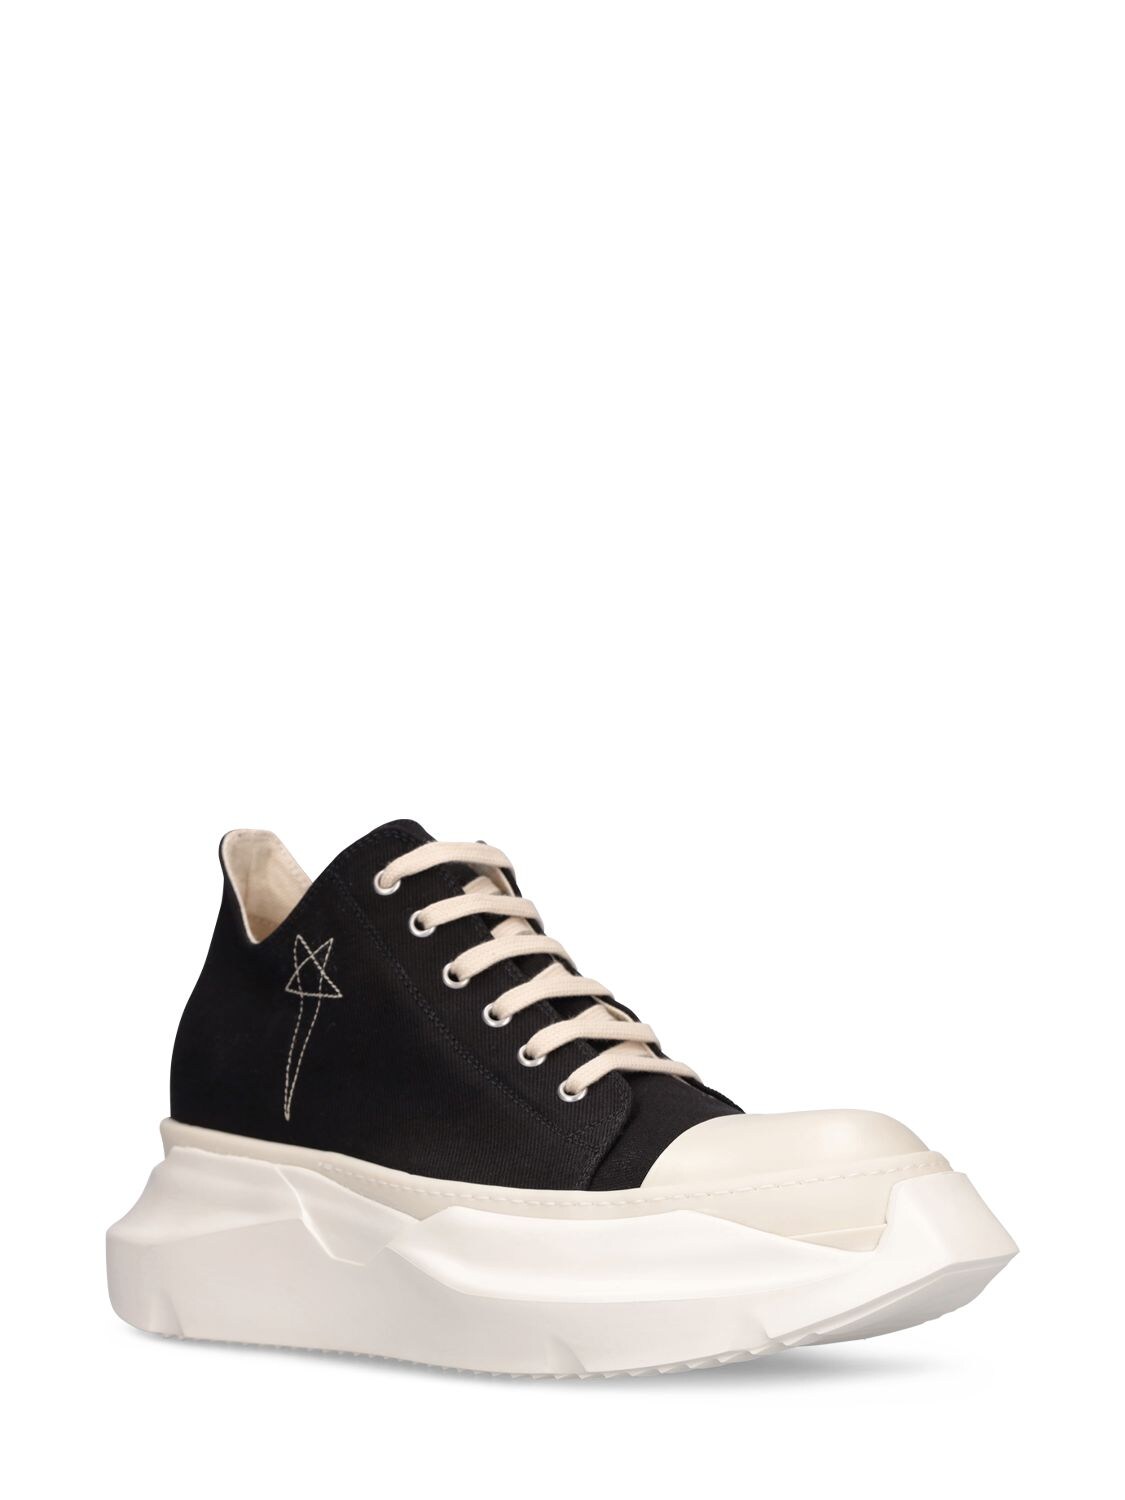 Rick Owens Drkshdw Abstract Low In Black | ModeSens